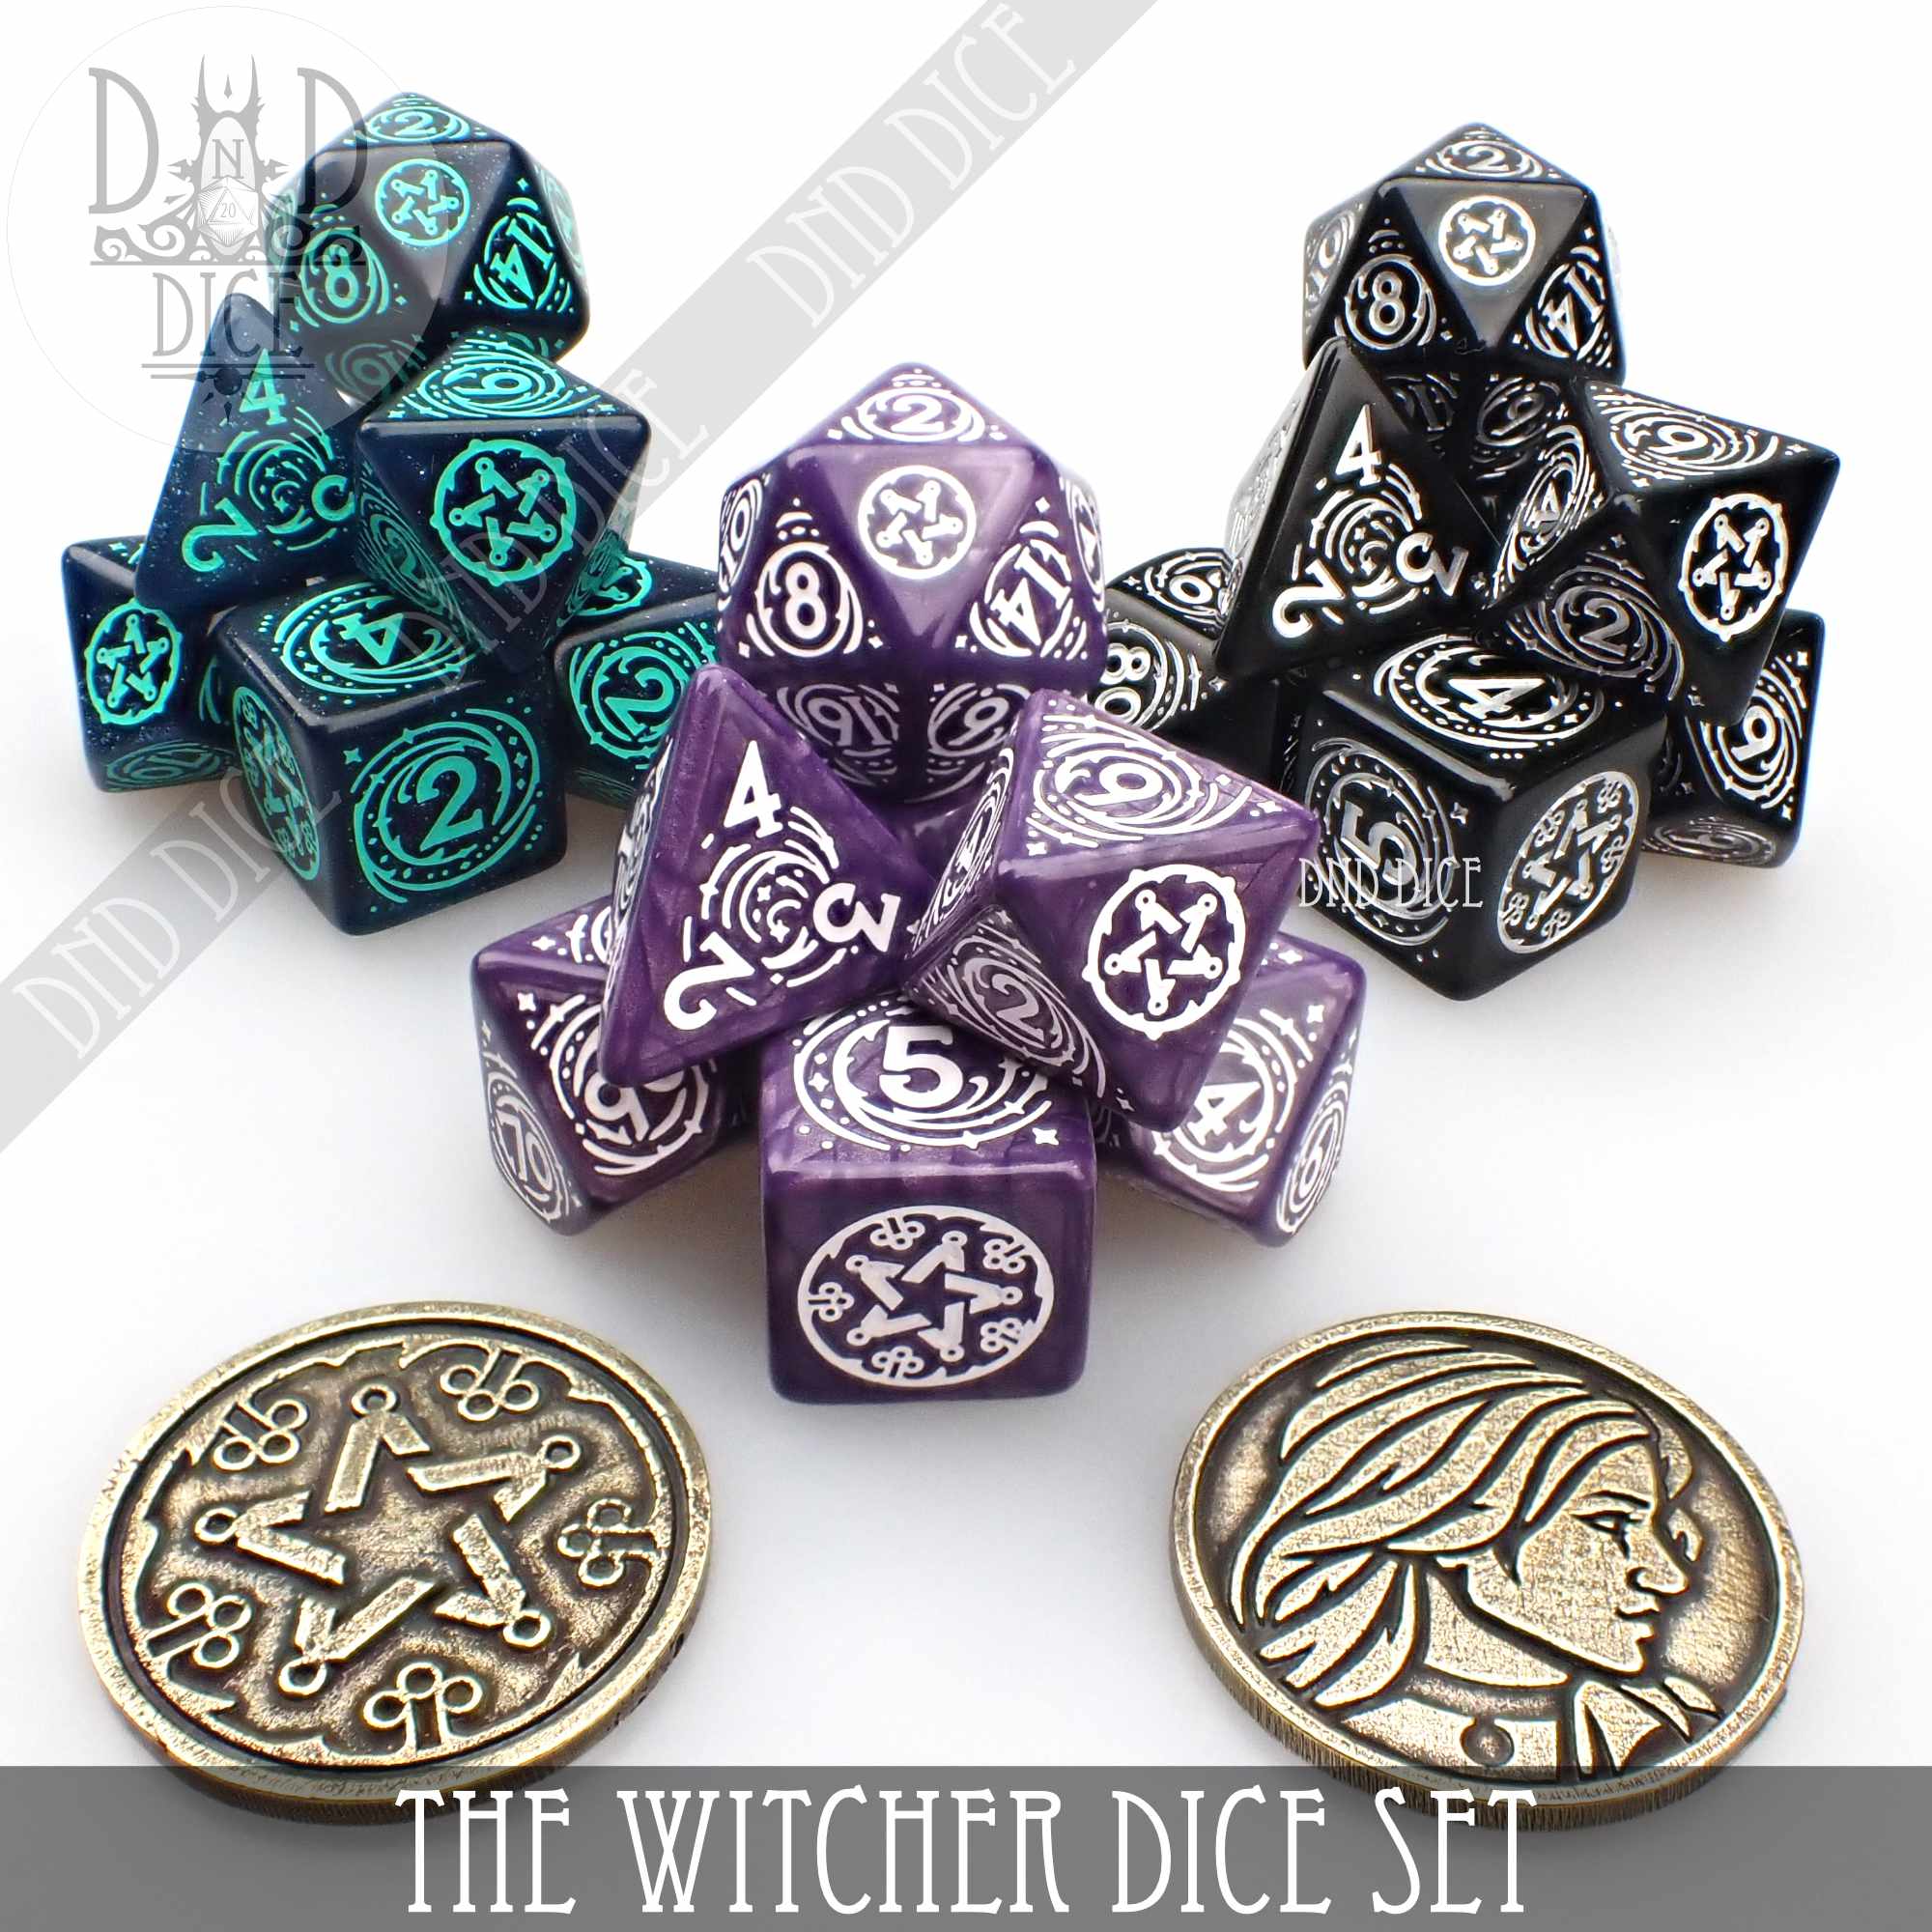 The Witcher Set & Coin - Yennefer